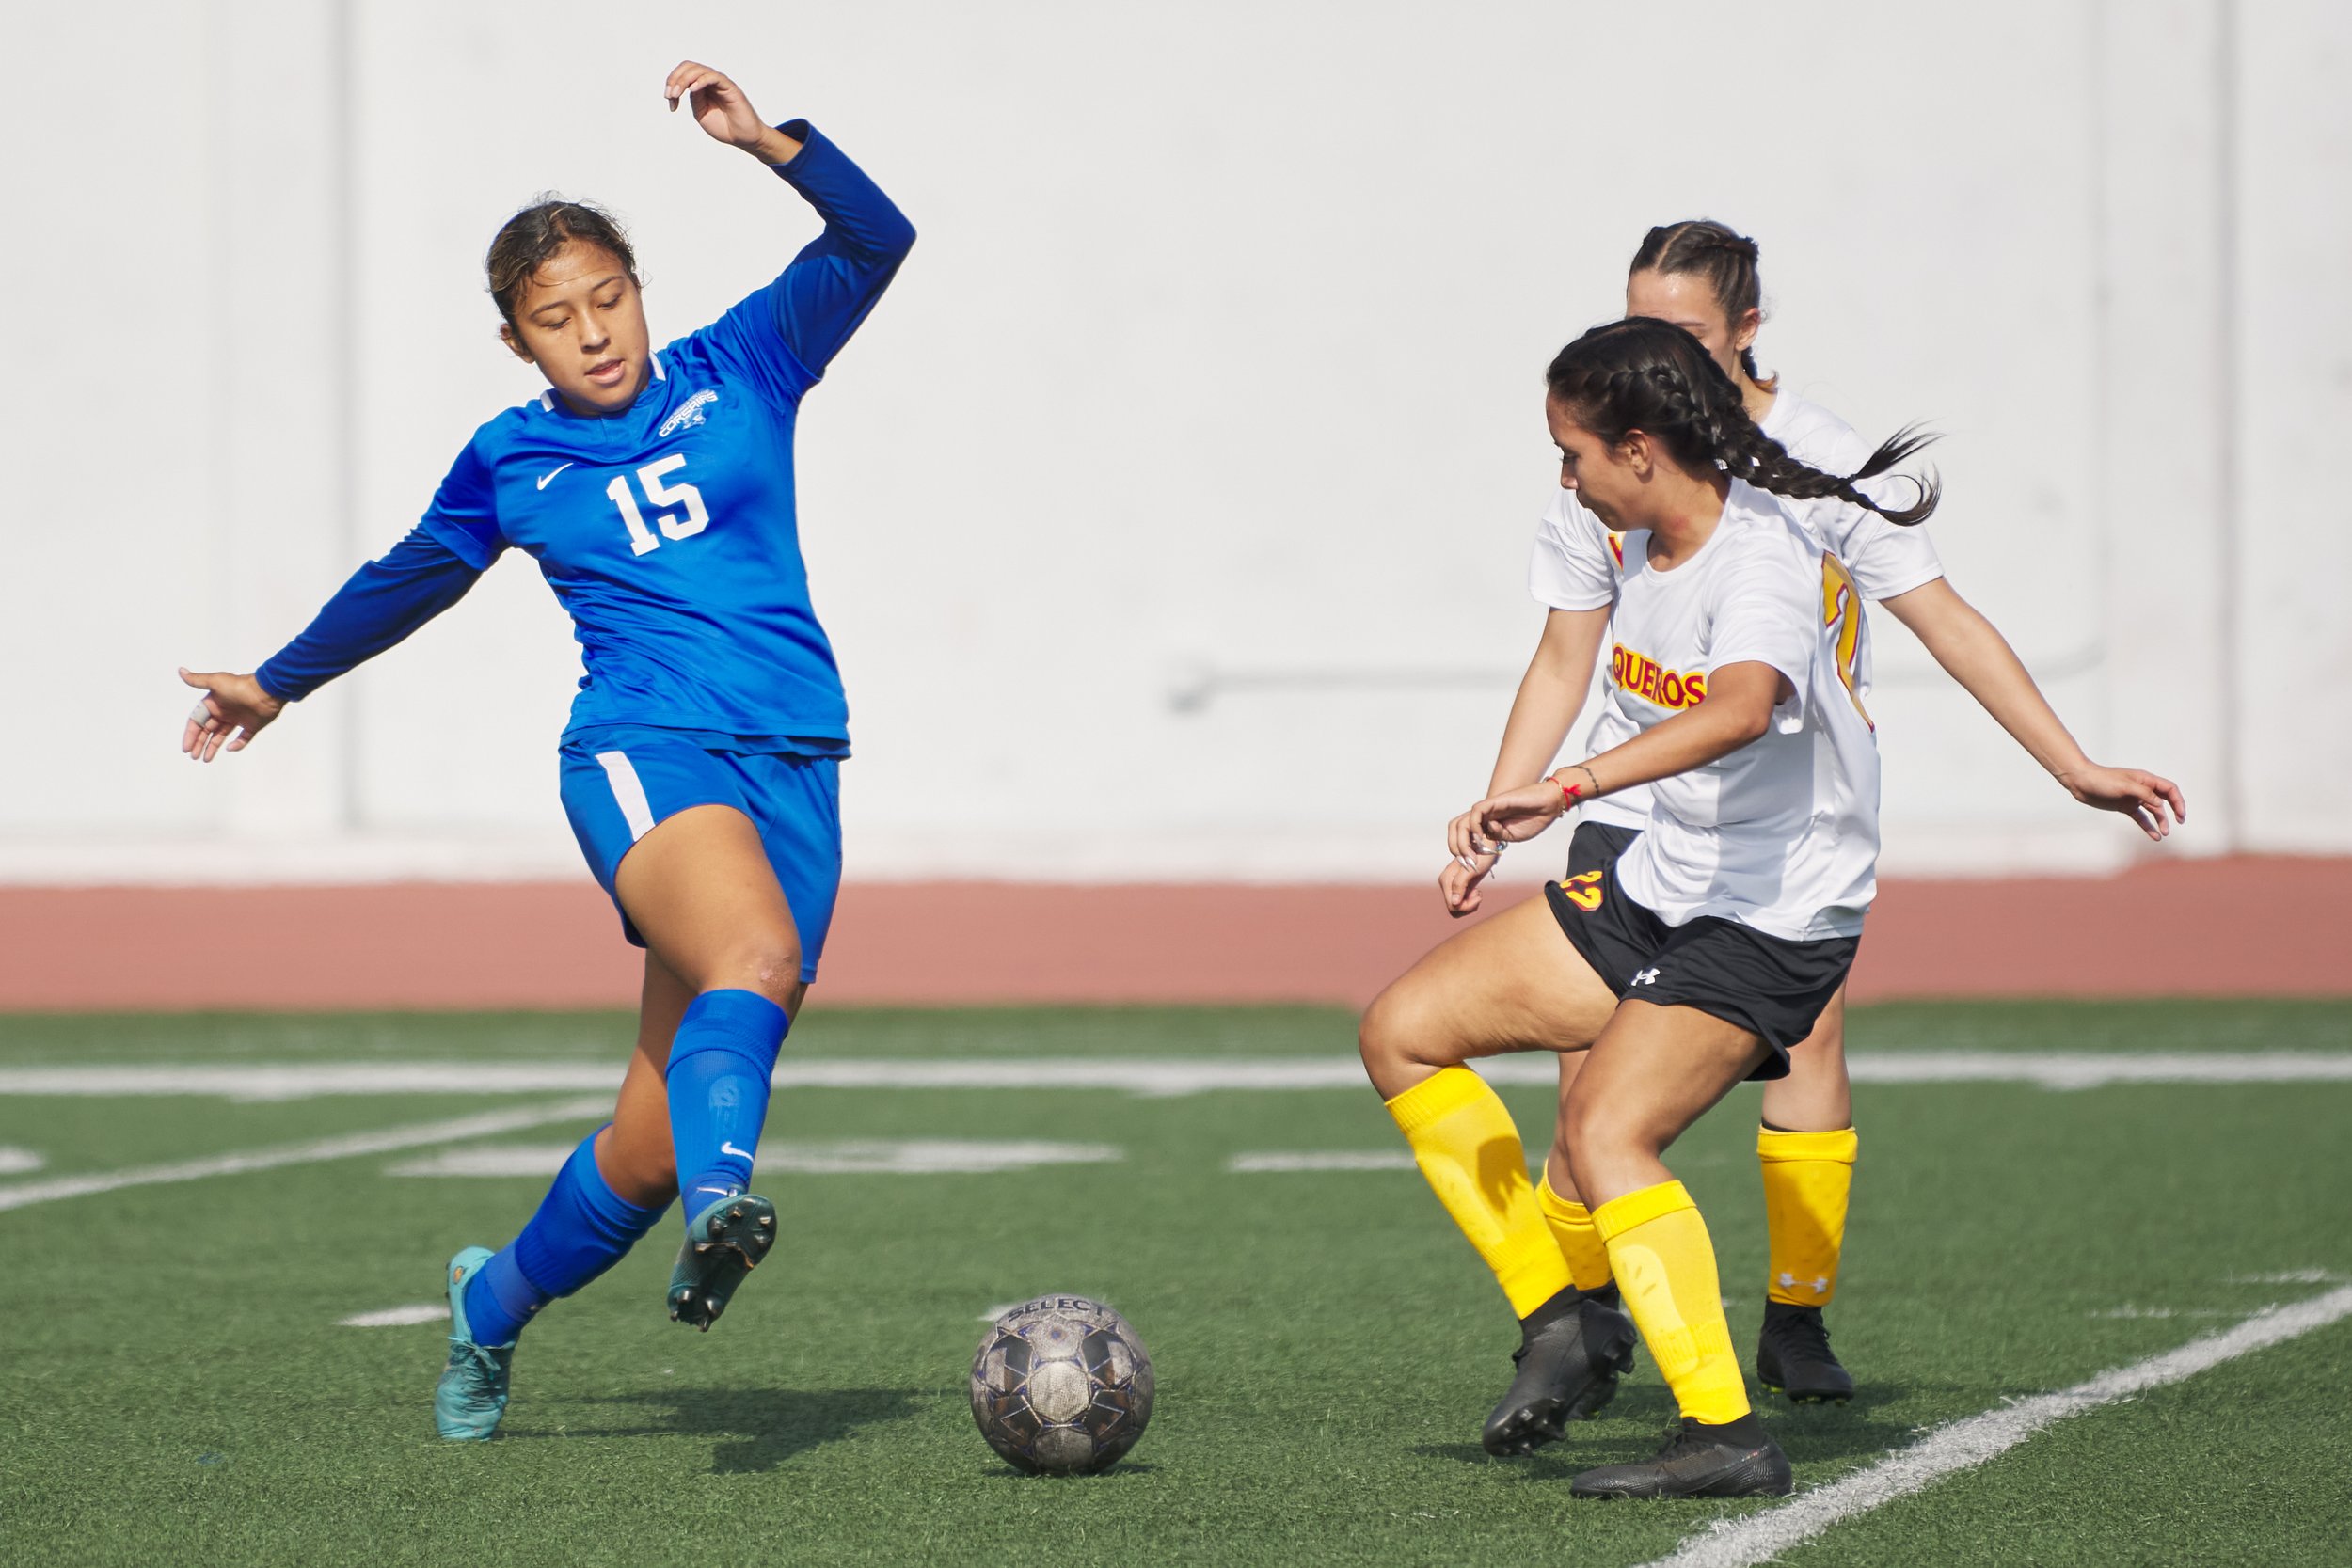  Santa Monica College Corsairs' Jacky Hernandez and Glendale Community College Vaqueros' Santi Eldimiri, with Destanie Gentry behind her, during the women's soccer match on Friday, Oct. 21, 2022, at Corsair Field in Santa Monica, Calif. The Corsairs 